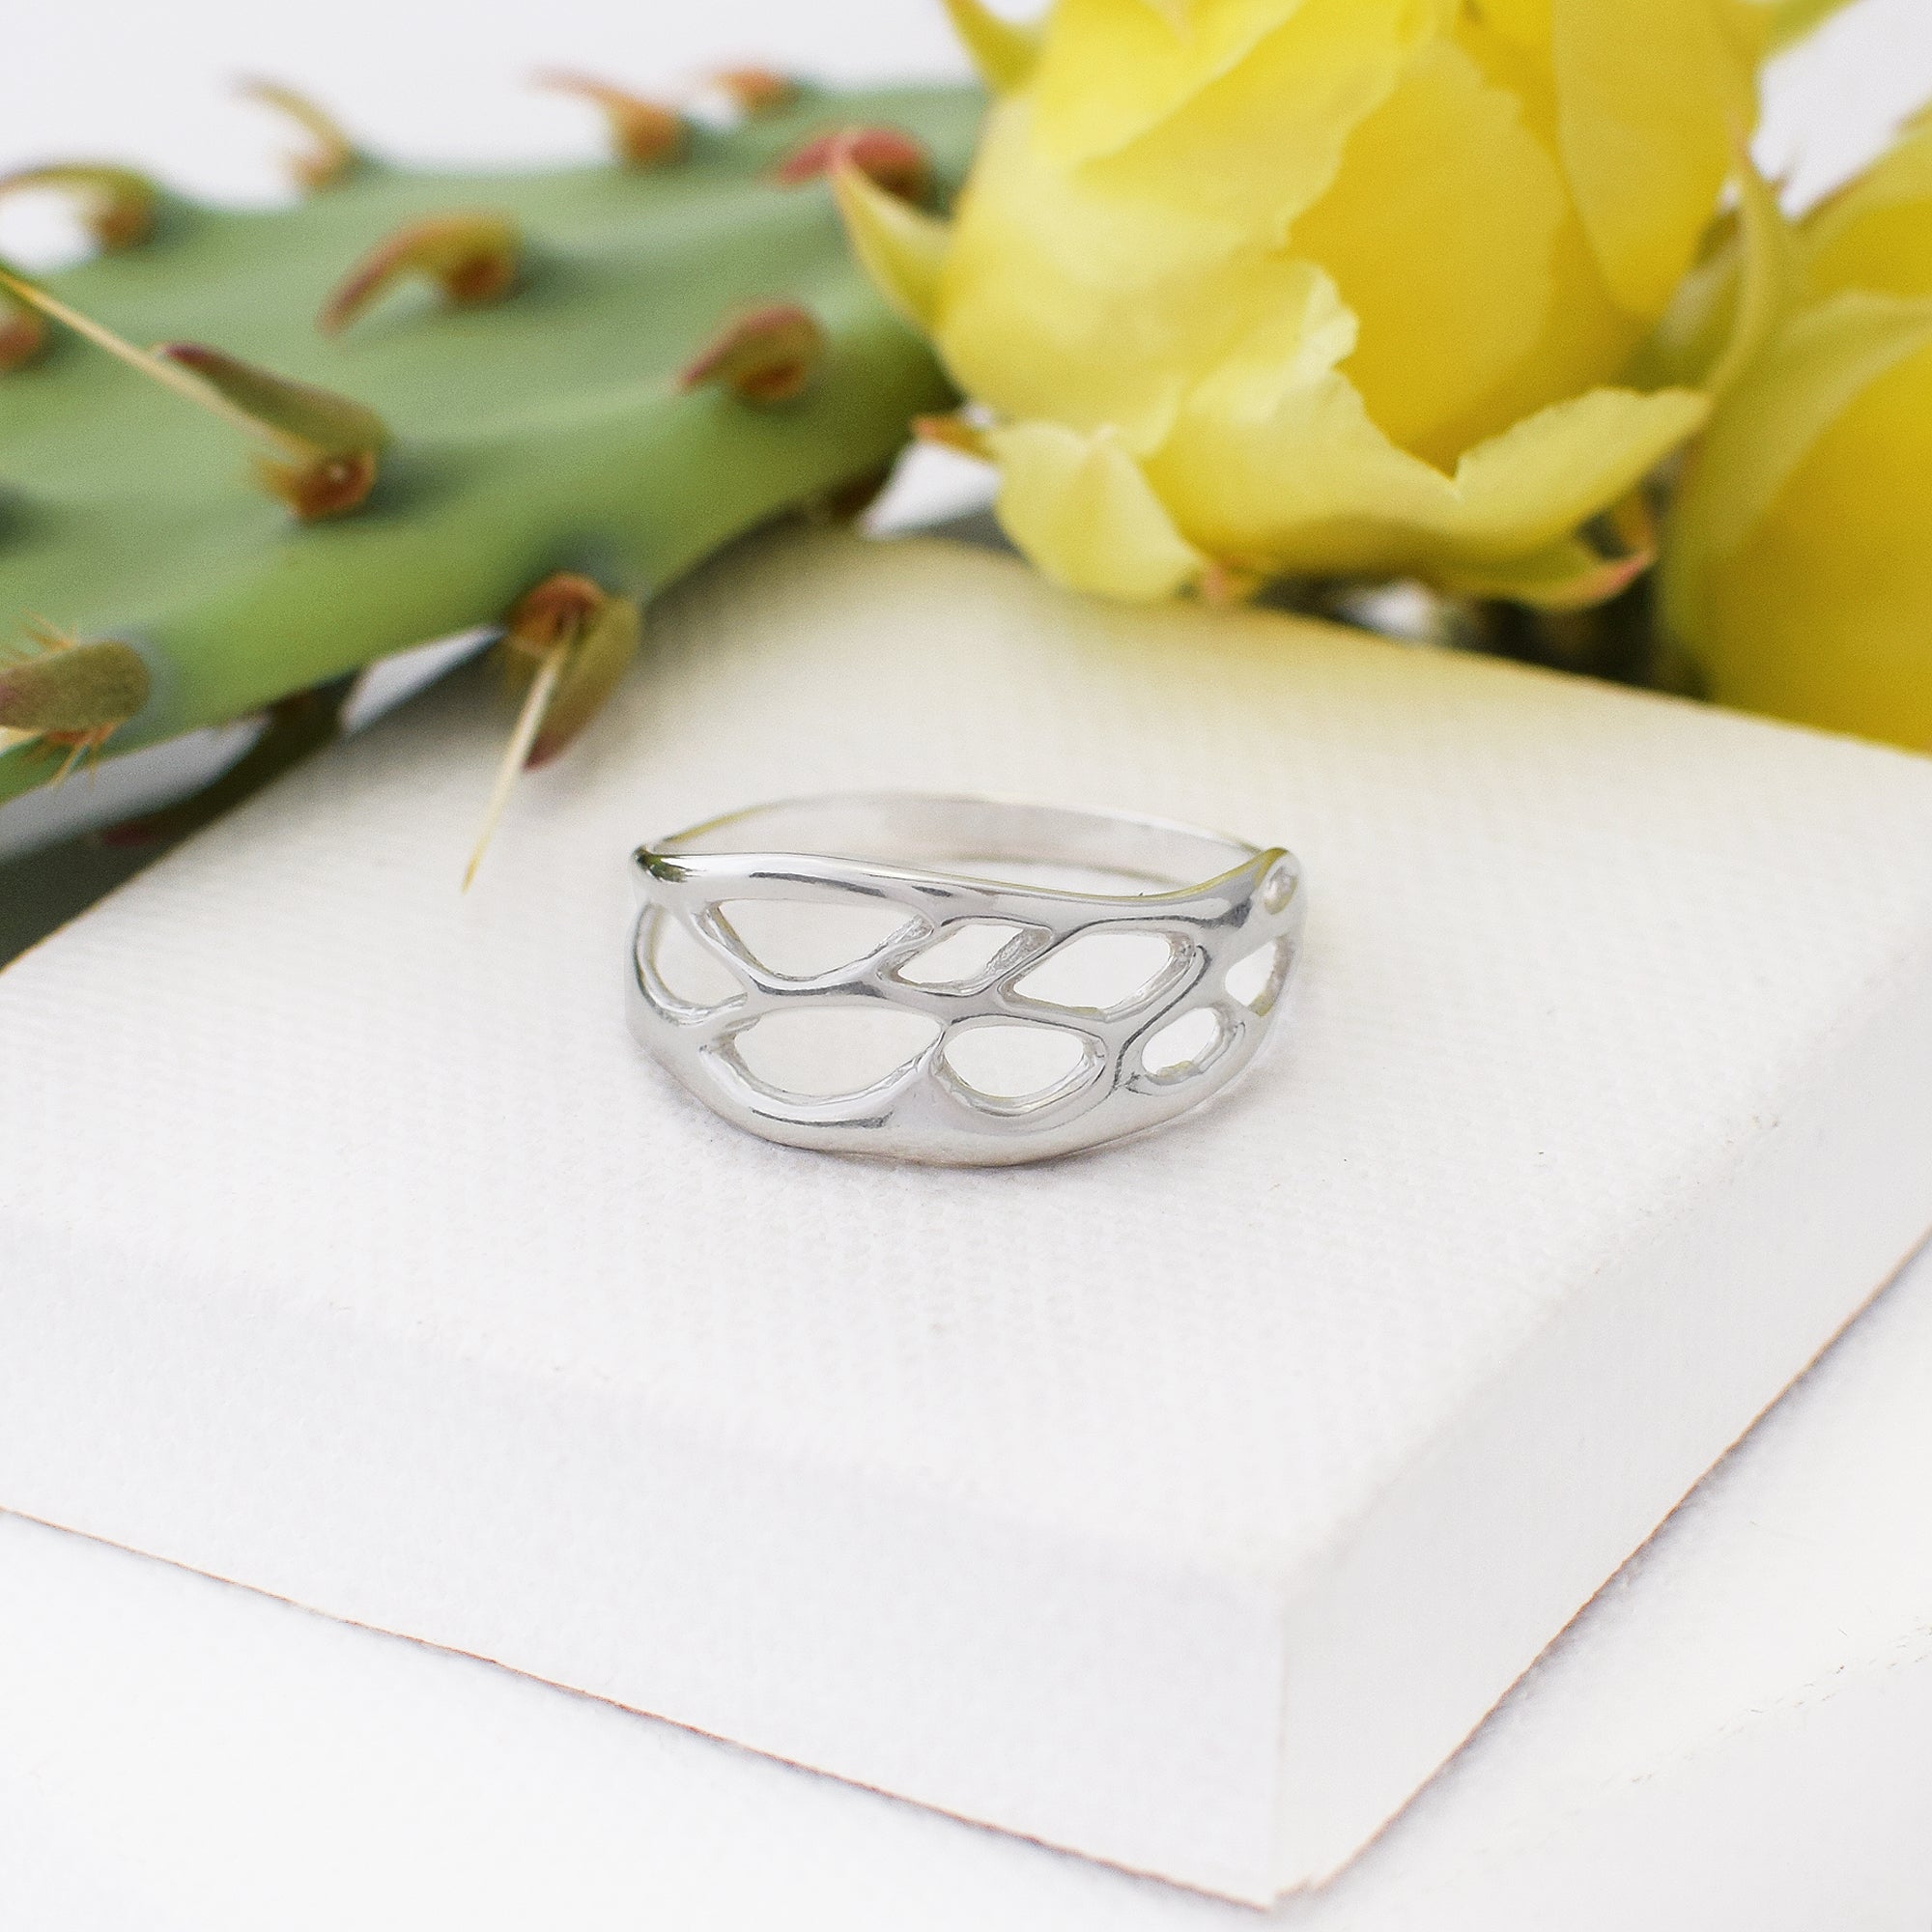 silver unique ring on white background with cactus accent